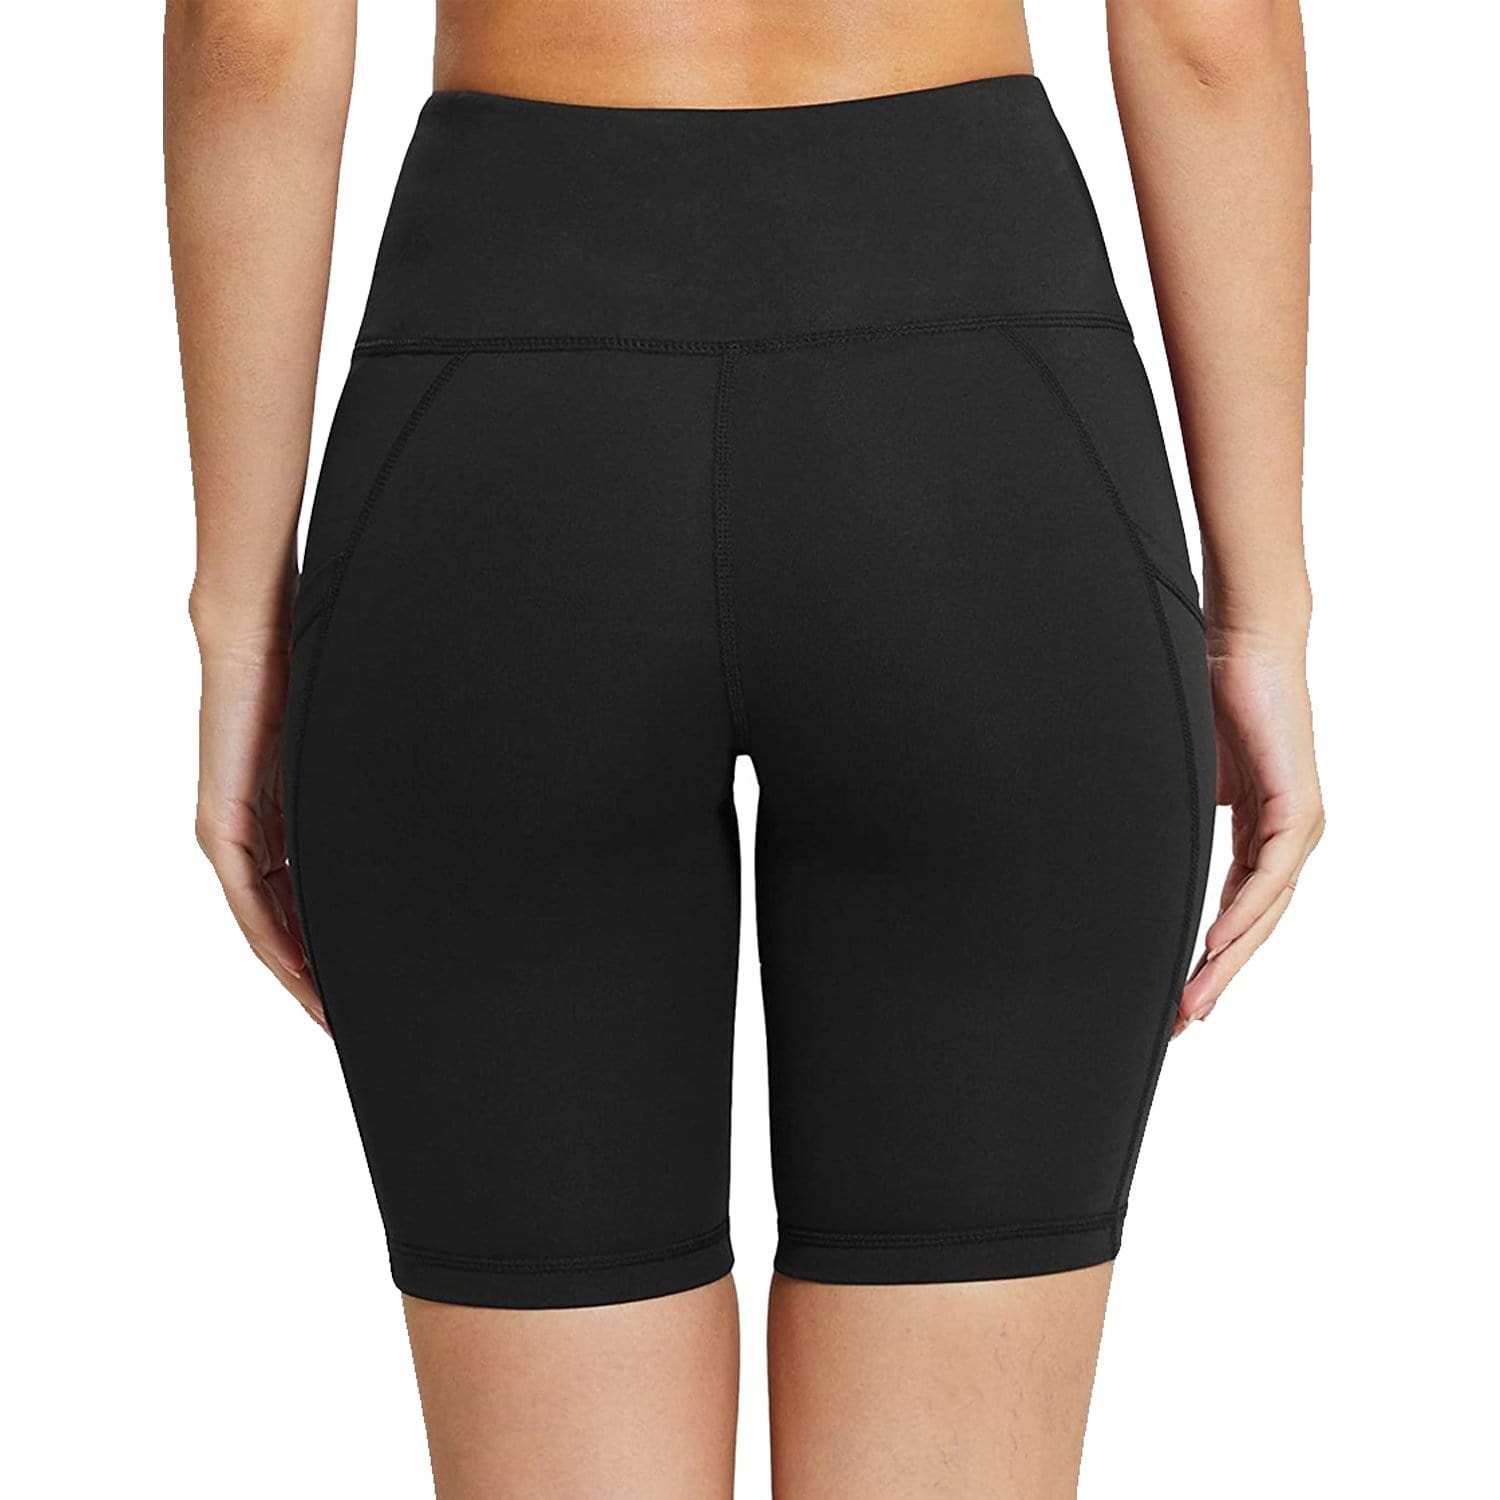 Athletic Curves Trimming Hot Yoga Shorts: Active Shorts Women Hgray/BLK S